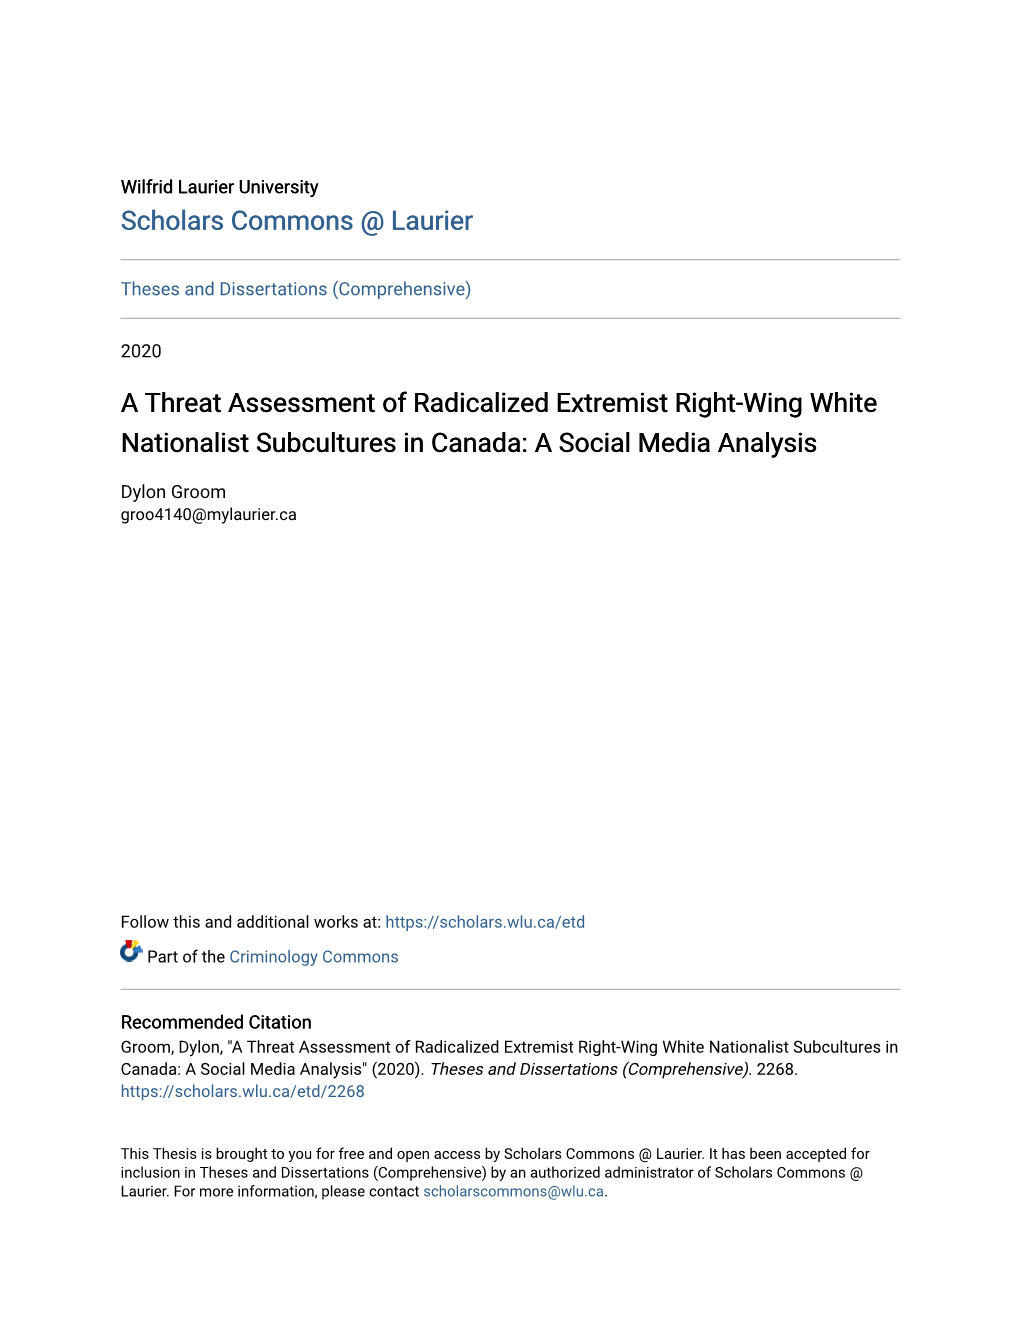 A Threat Assessment of Radicalized Extremist Right-Wing White Nationalist Subcultures in Canada: a Social Media Analysis